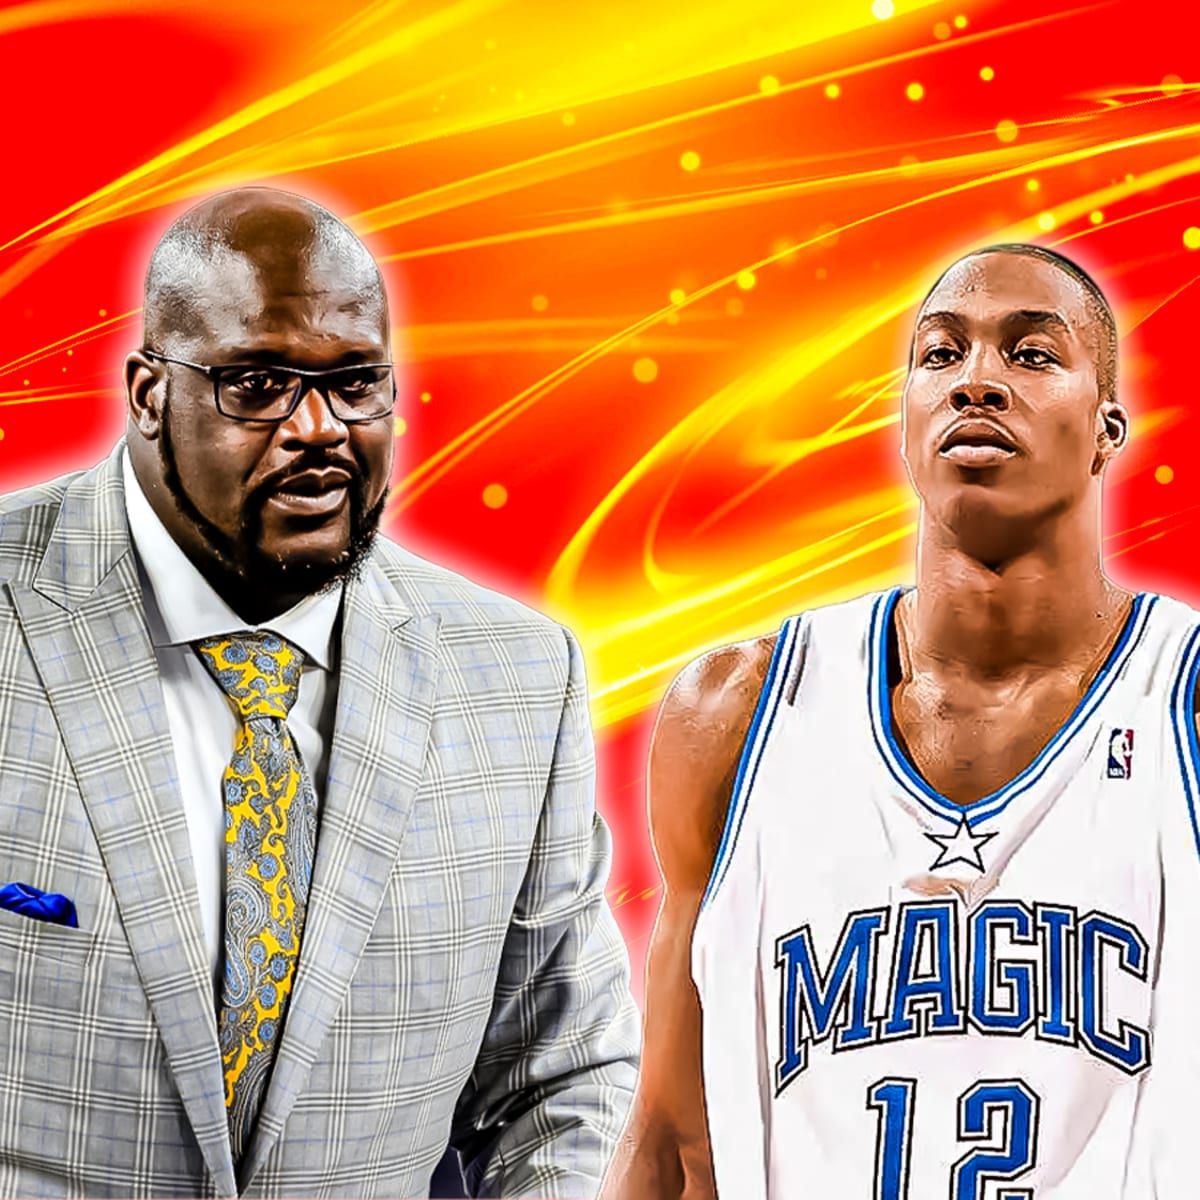 Shaq wants Dwight Howard to succeed with Lakers, says he needs to